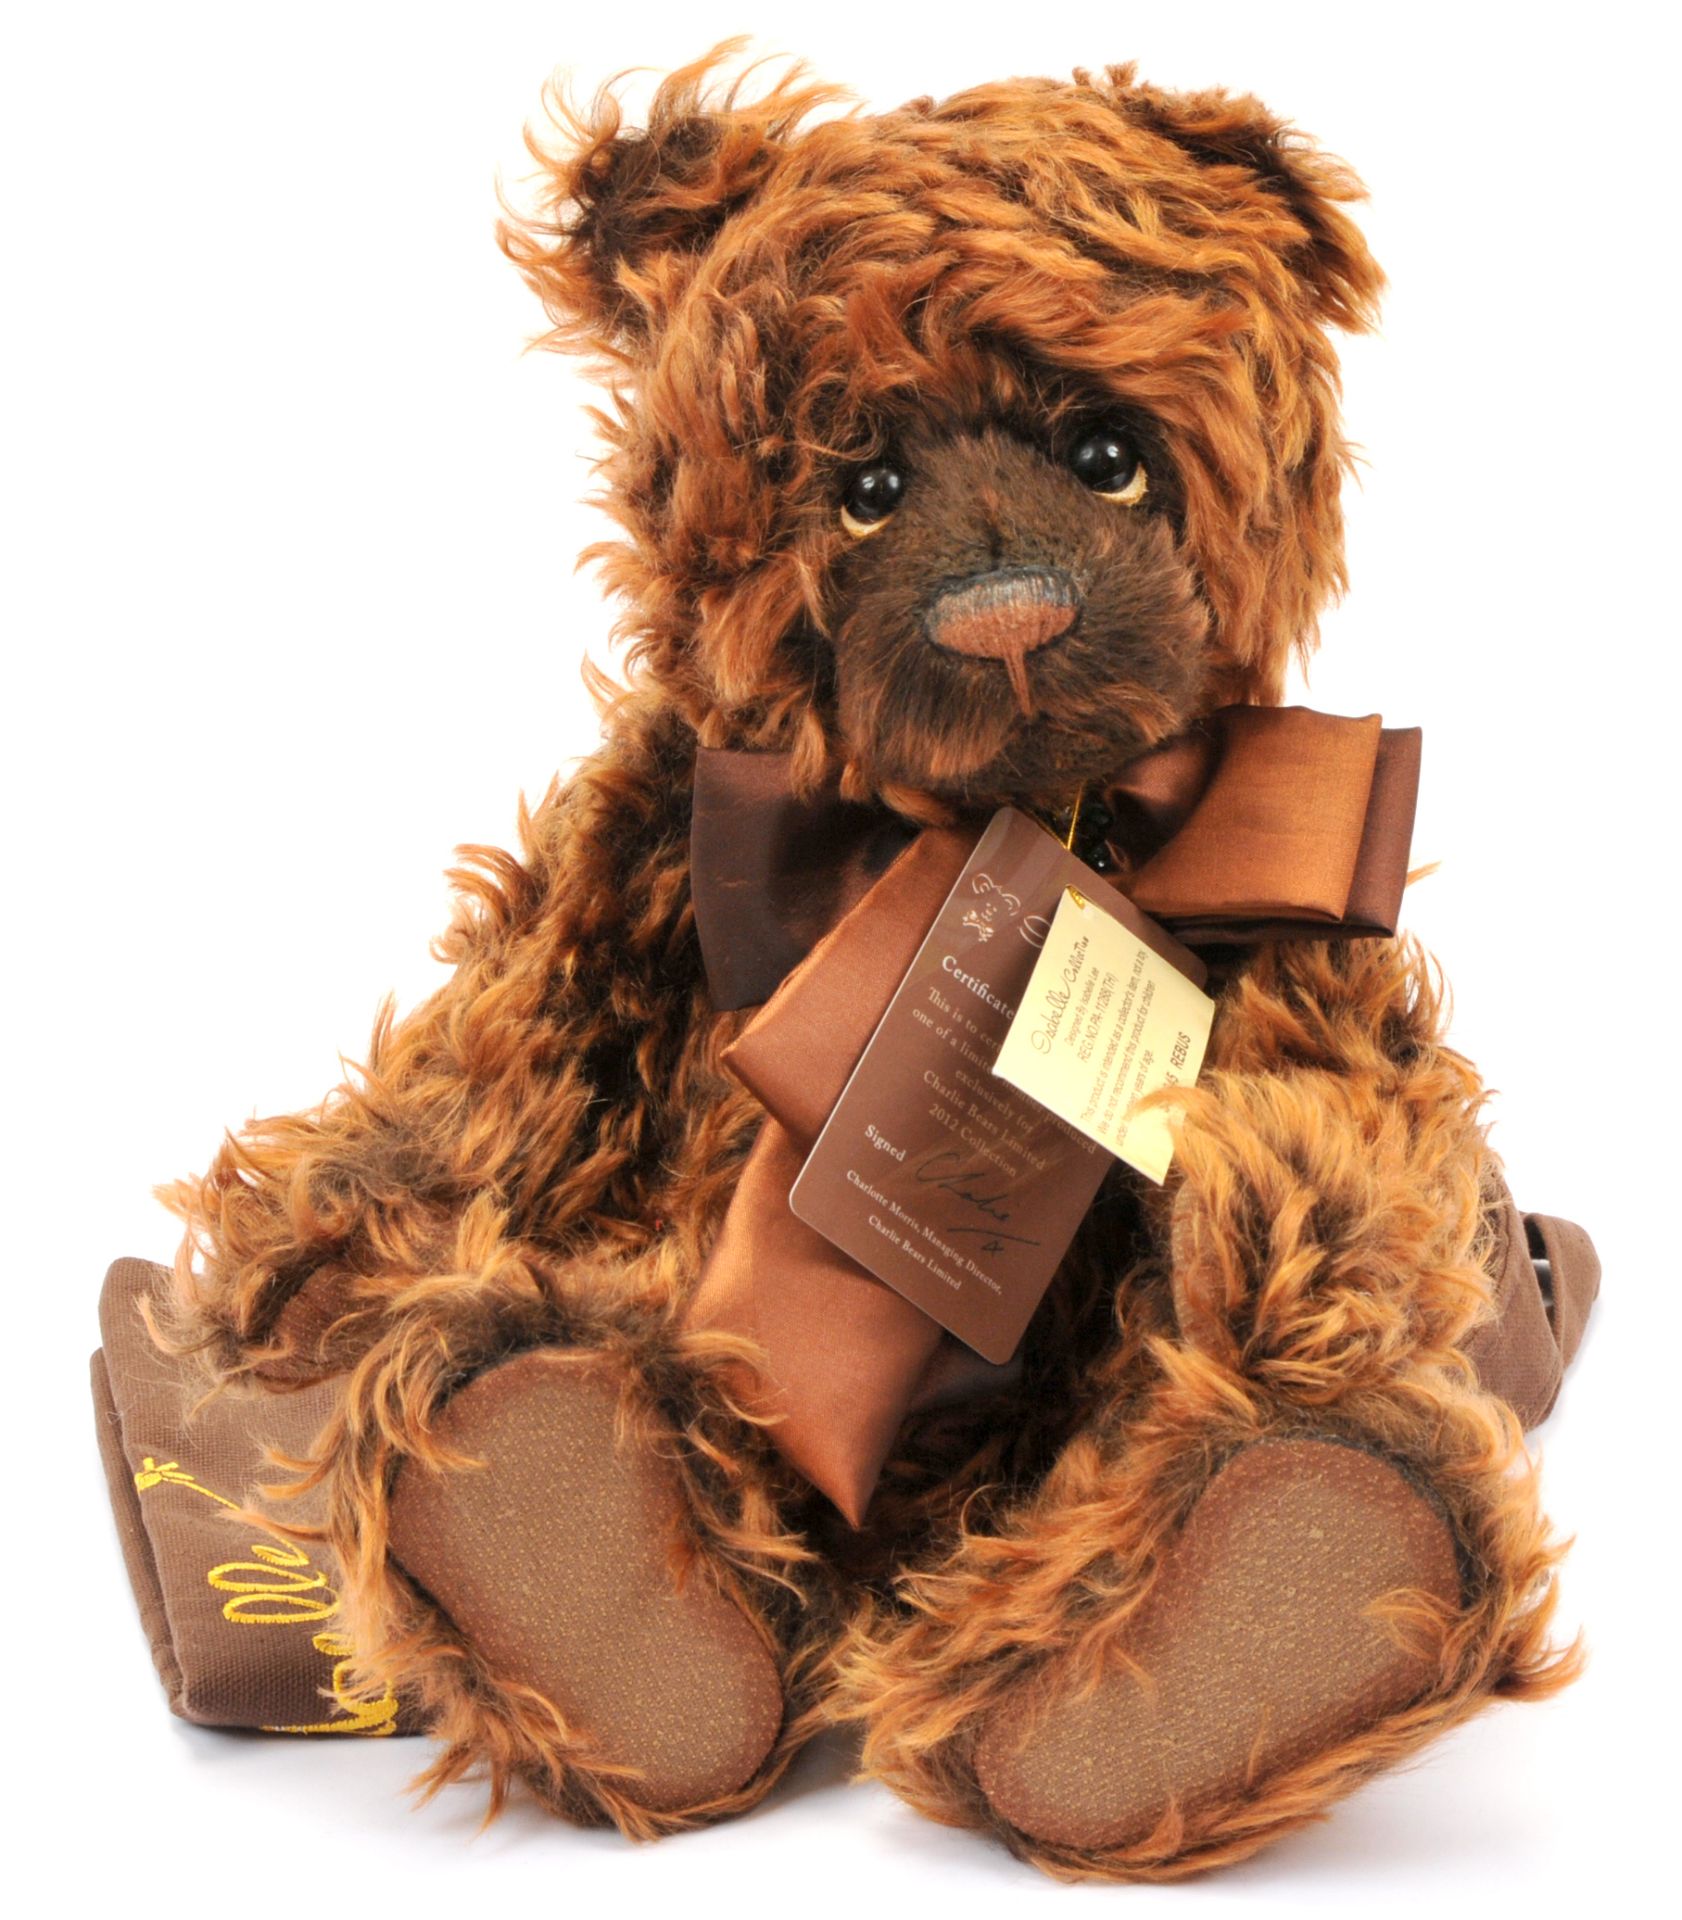 Charlie Bears Isabelle Collection Rebus teddy bear